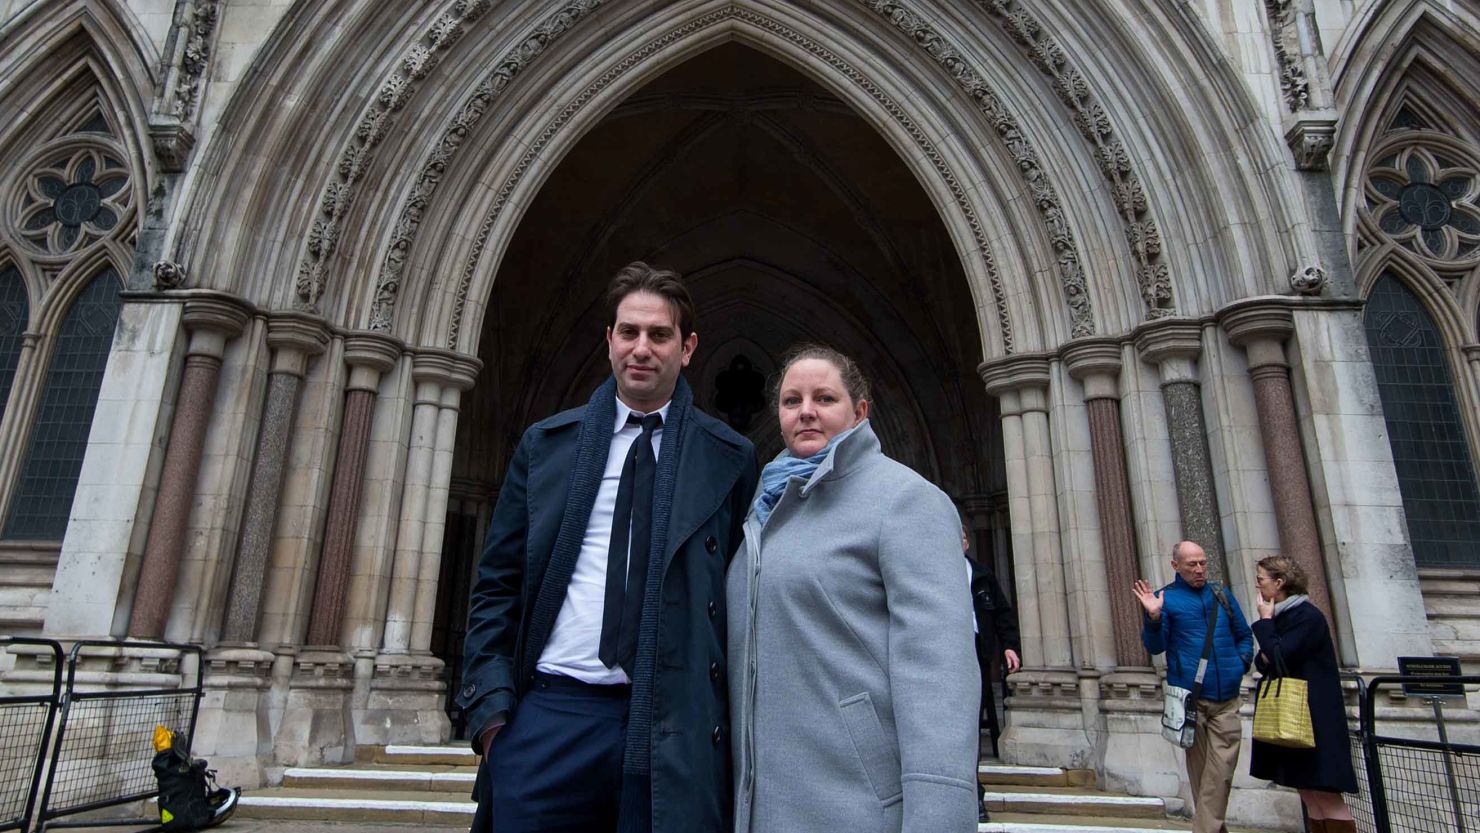 Charles Keidan and Rebecca Steinfeld won a lawsuit challenging the restriction of civil partnerships to same-sex couples.